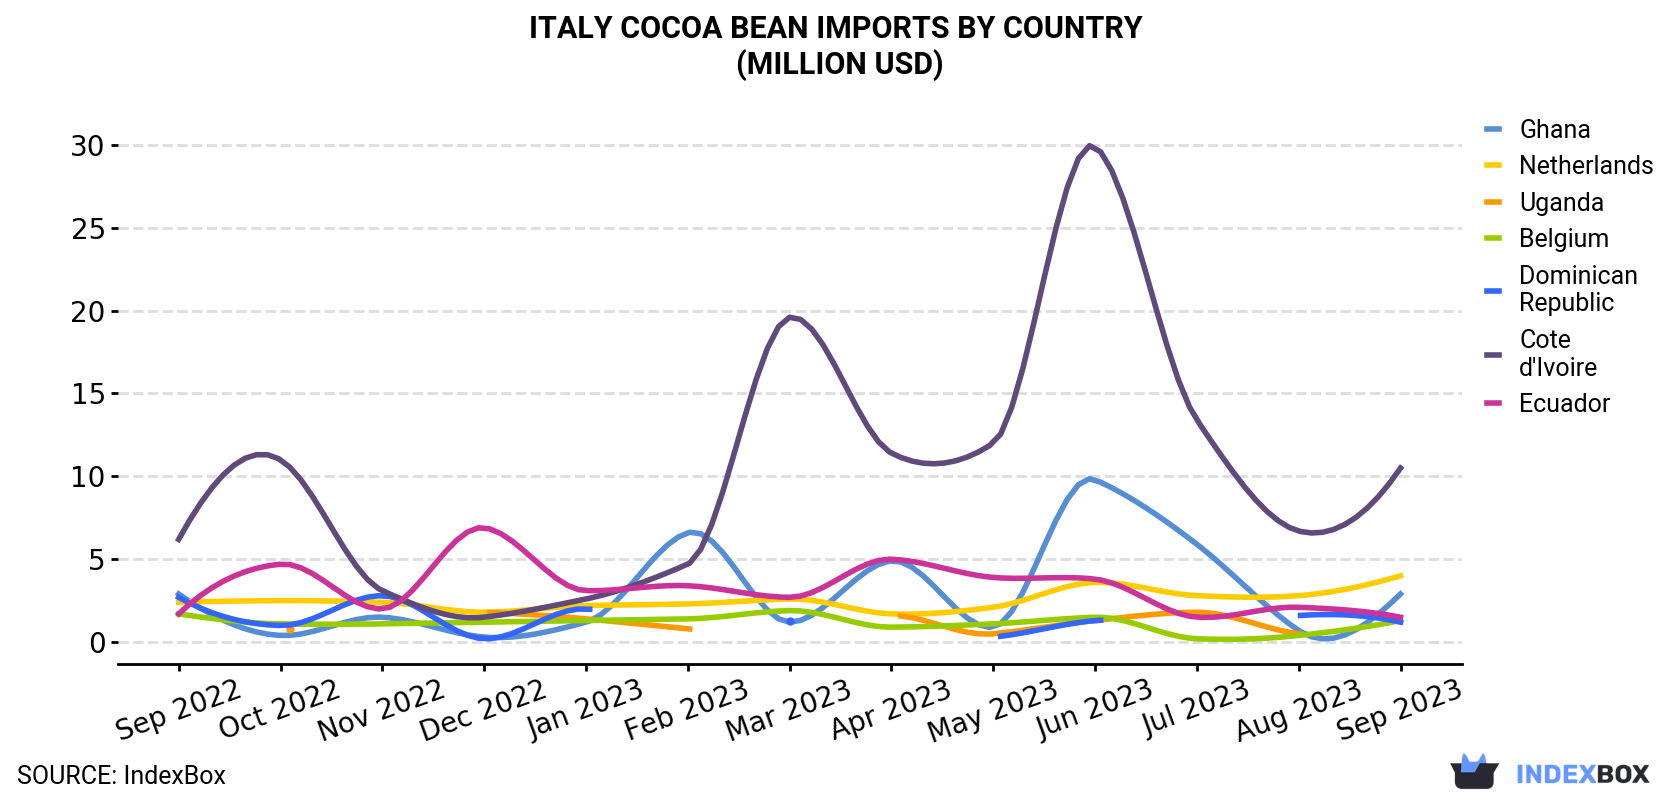 Italy Cocoa Bean Imports By Country (Million USD)